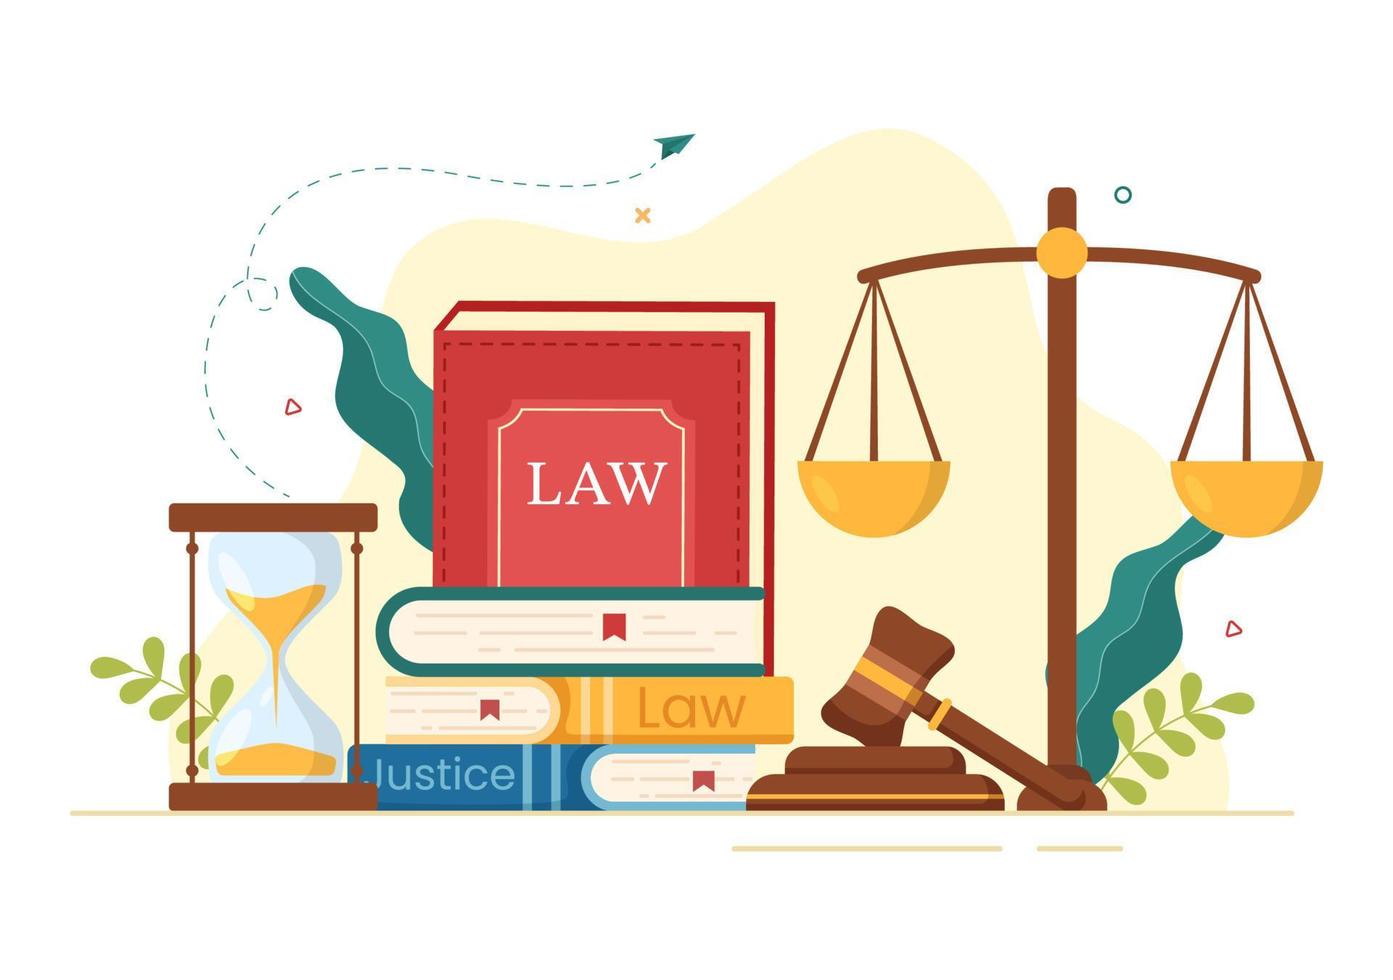 Law Firm Services with Justice, Legal Advice, Judgement and Lawyer Consultant in Flat Cartoon Poster Hand Drawn Templates Illustration vector